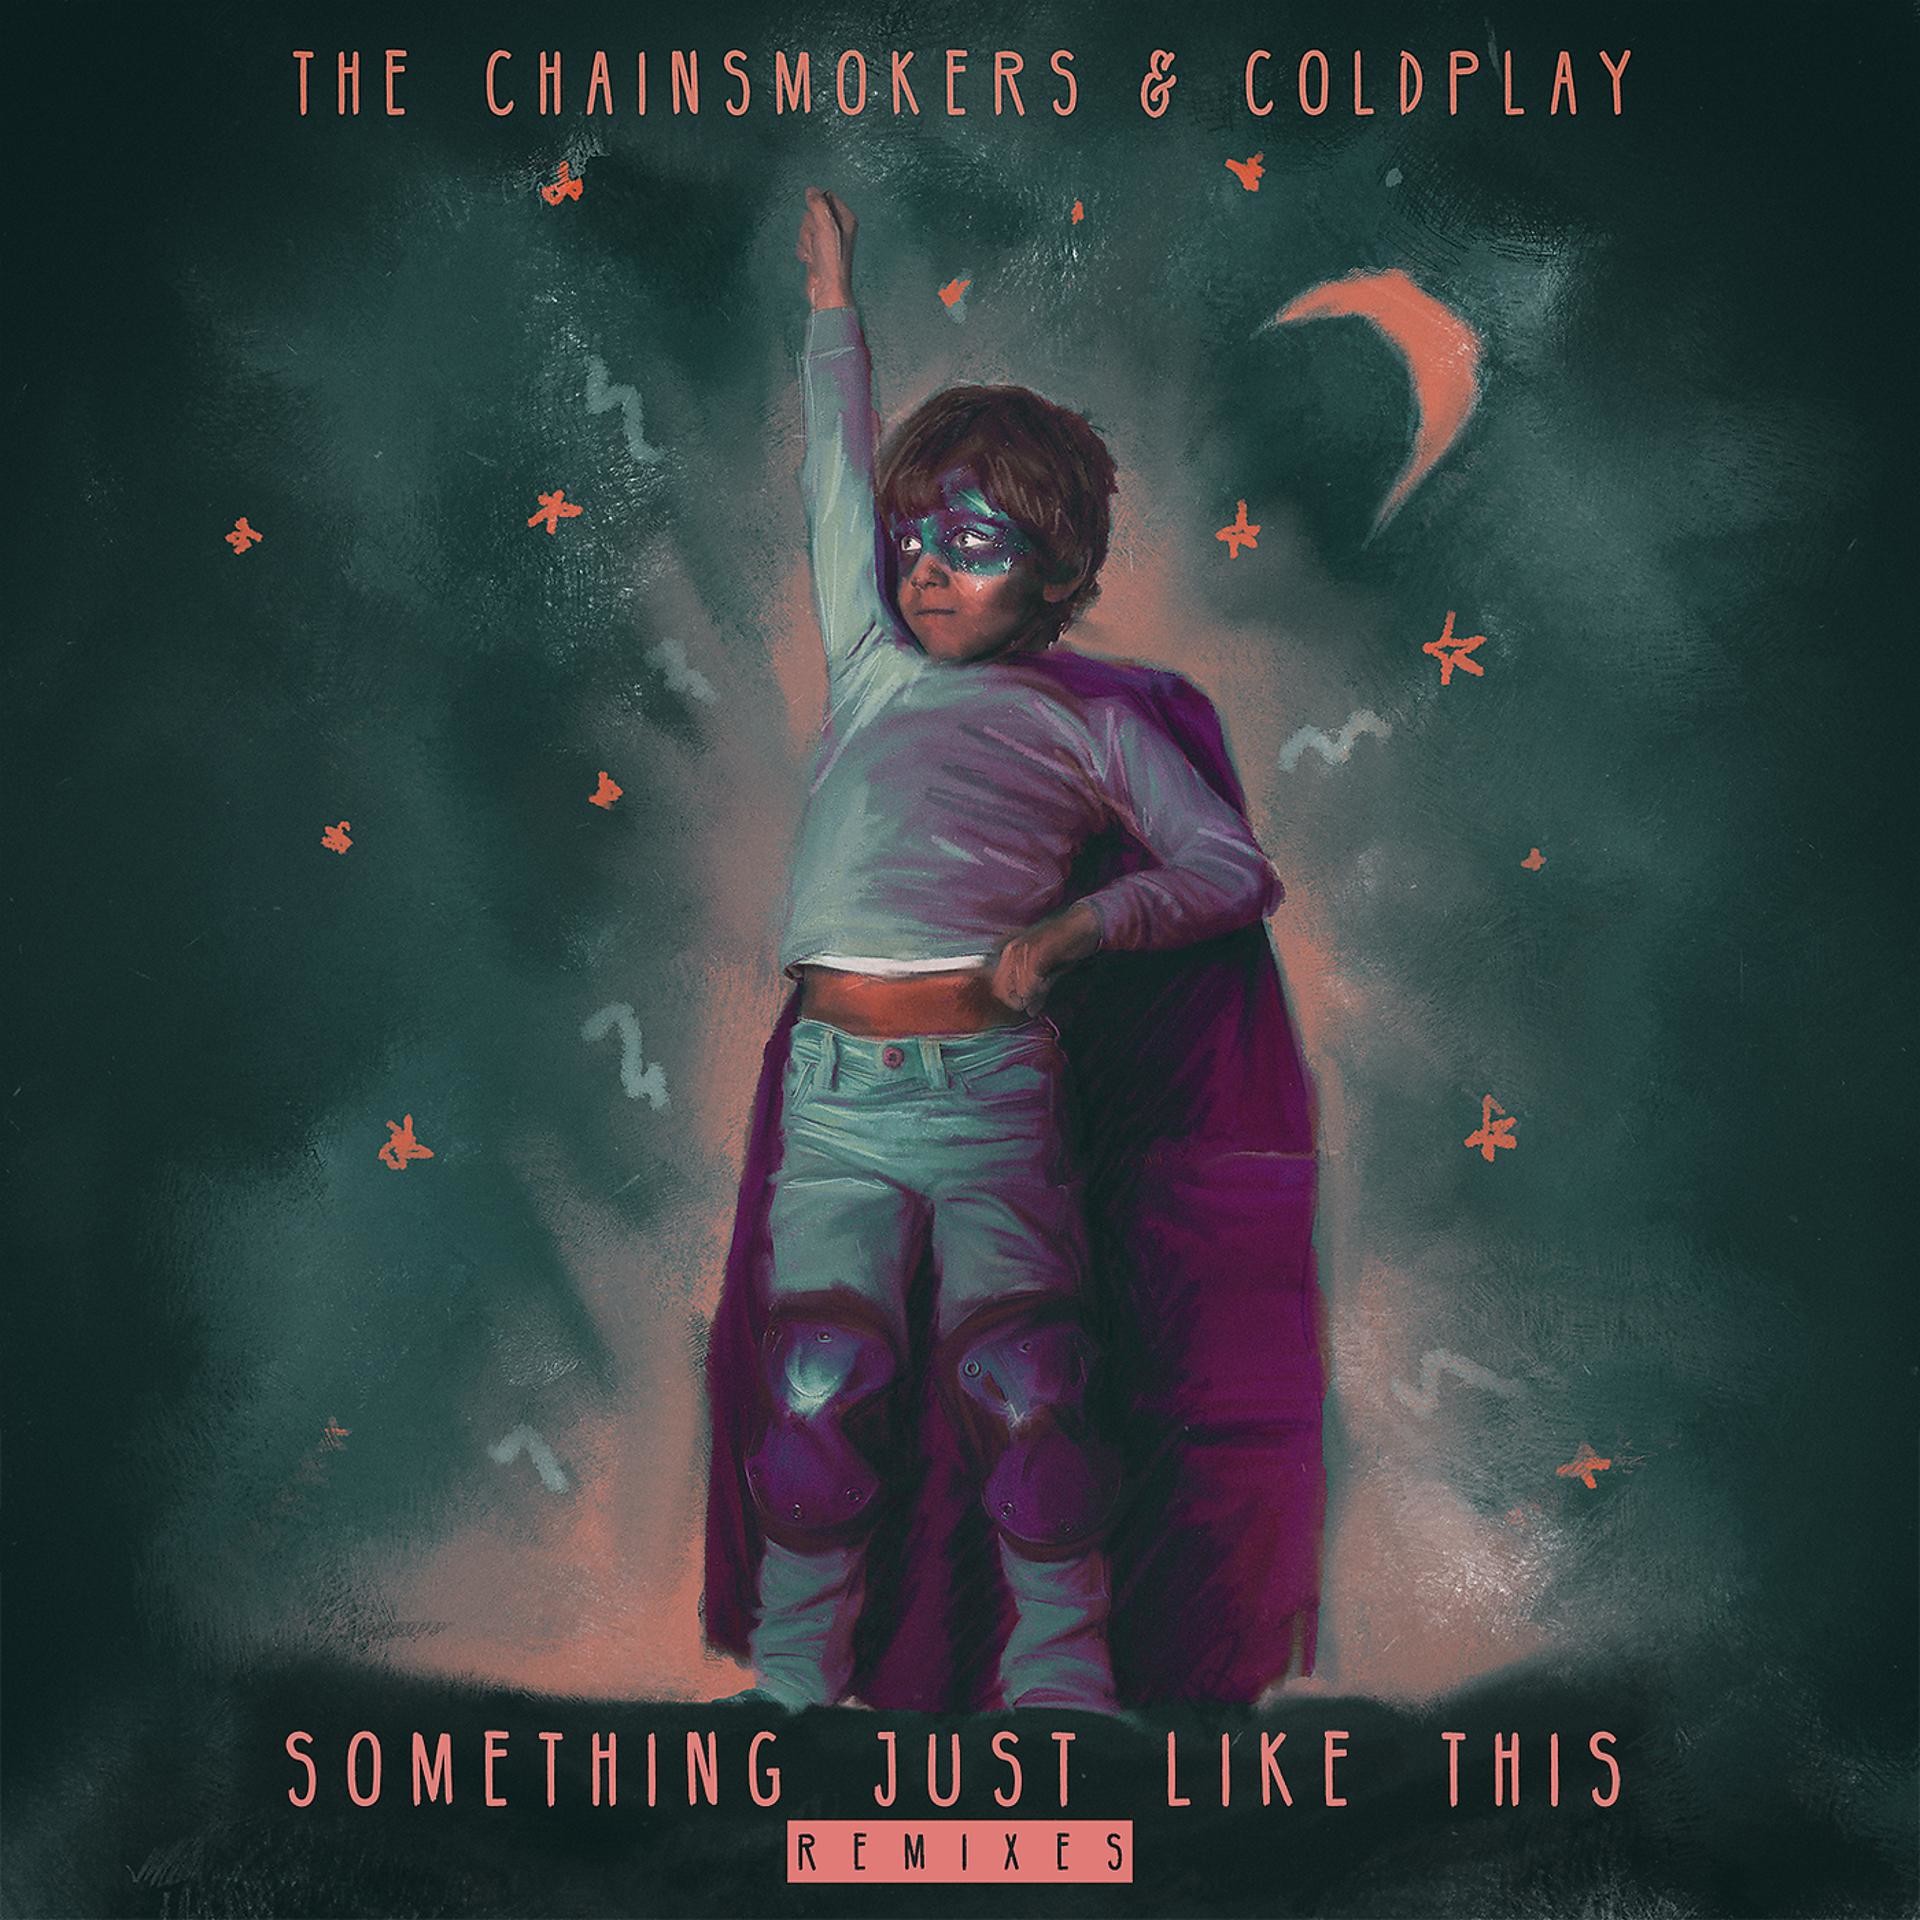 The Chainsmokers Coldplay something just like this. Chainsmokers обложка. Something just like this обложка. The Chainsmokers обложка альбома. Don mp3 remix